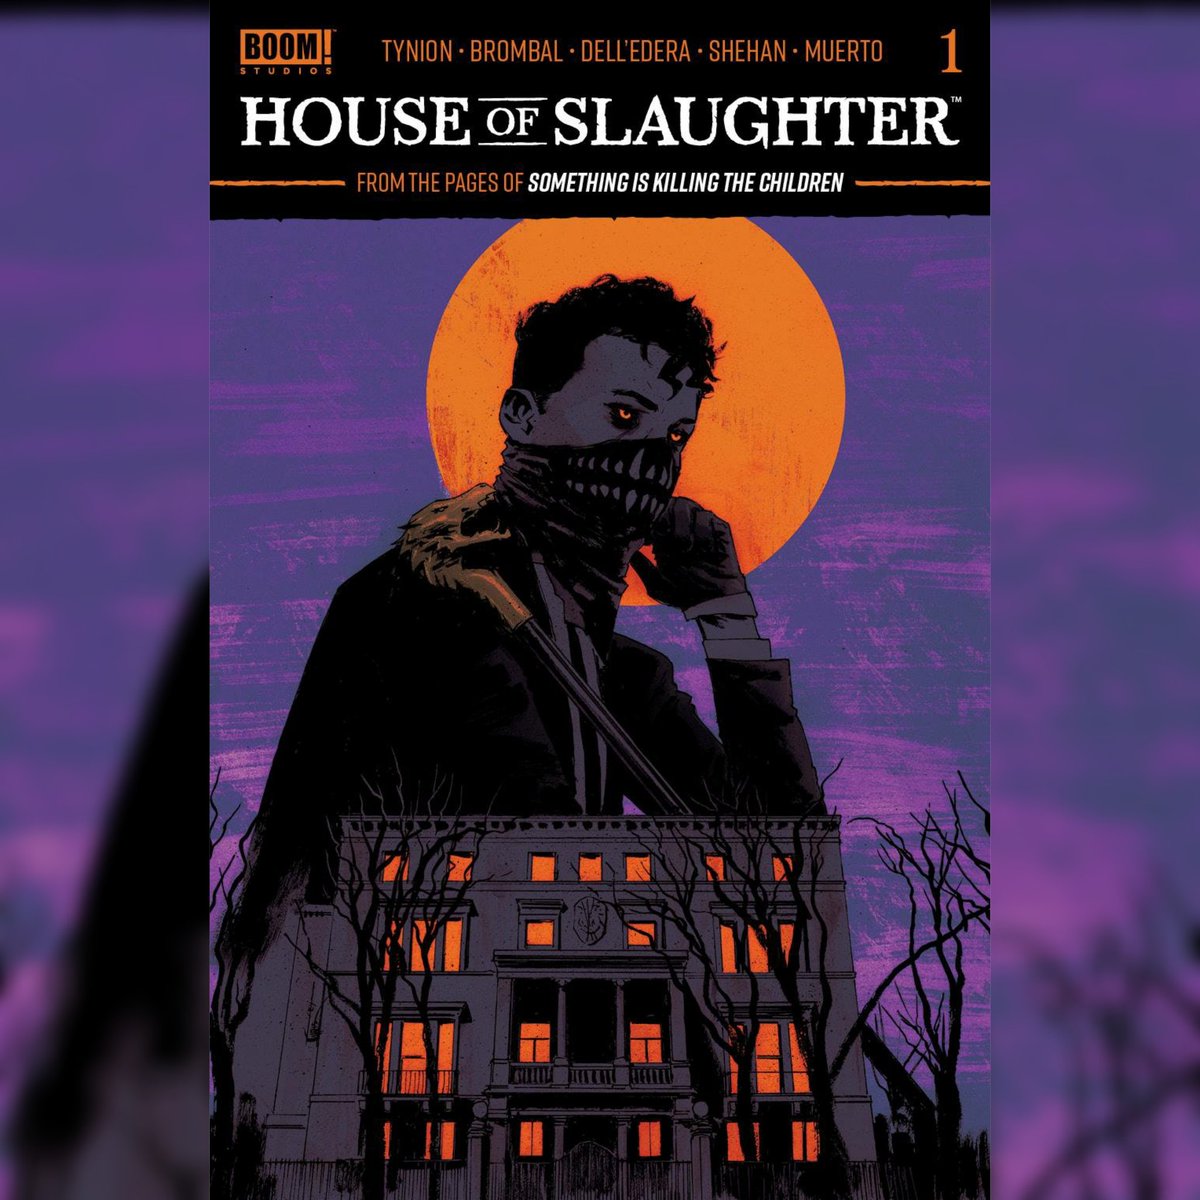 😈 A cover is always a sure bet, but which House of Slaughter #1 variant covers are you grabbing ⁉️ 

#TheHoo7igans #comicbooks #houseofslaughter #indiecomics #BoomStudios #boomcomics #tinyonion #jamestynioniv #wertherdelledera #tatebrombal #chrisshehan #horrorcomics #horrorstory